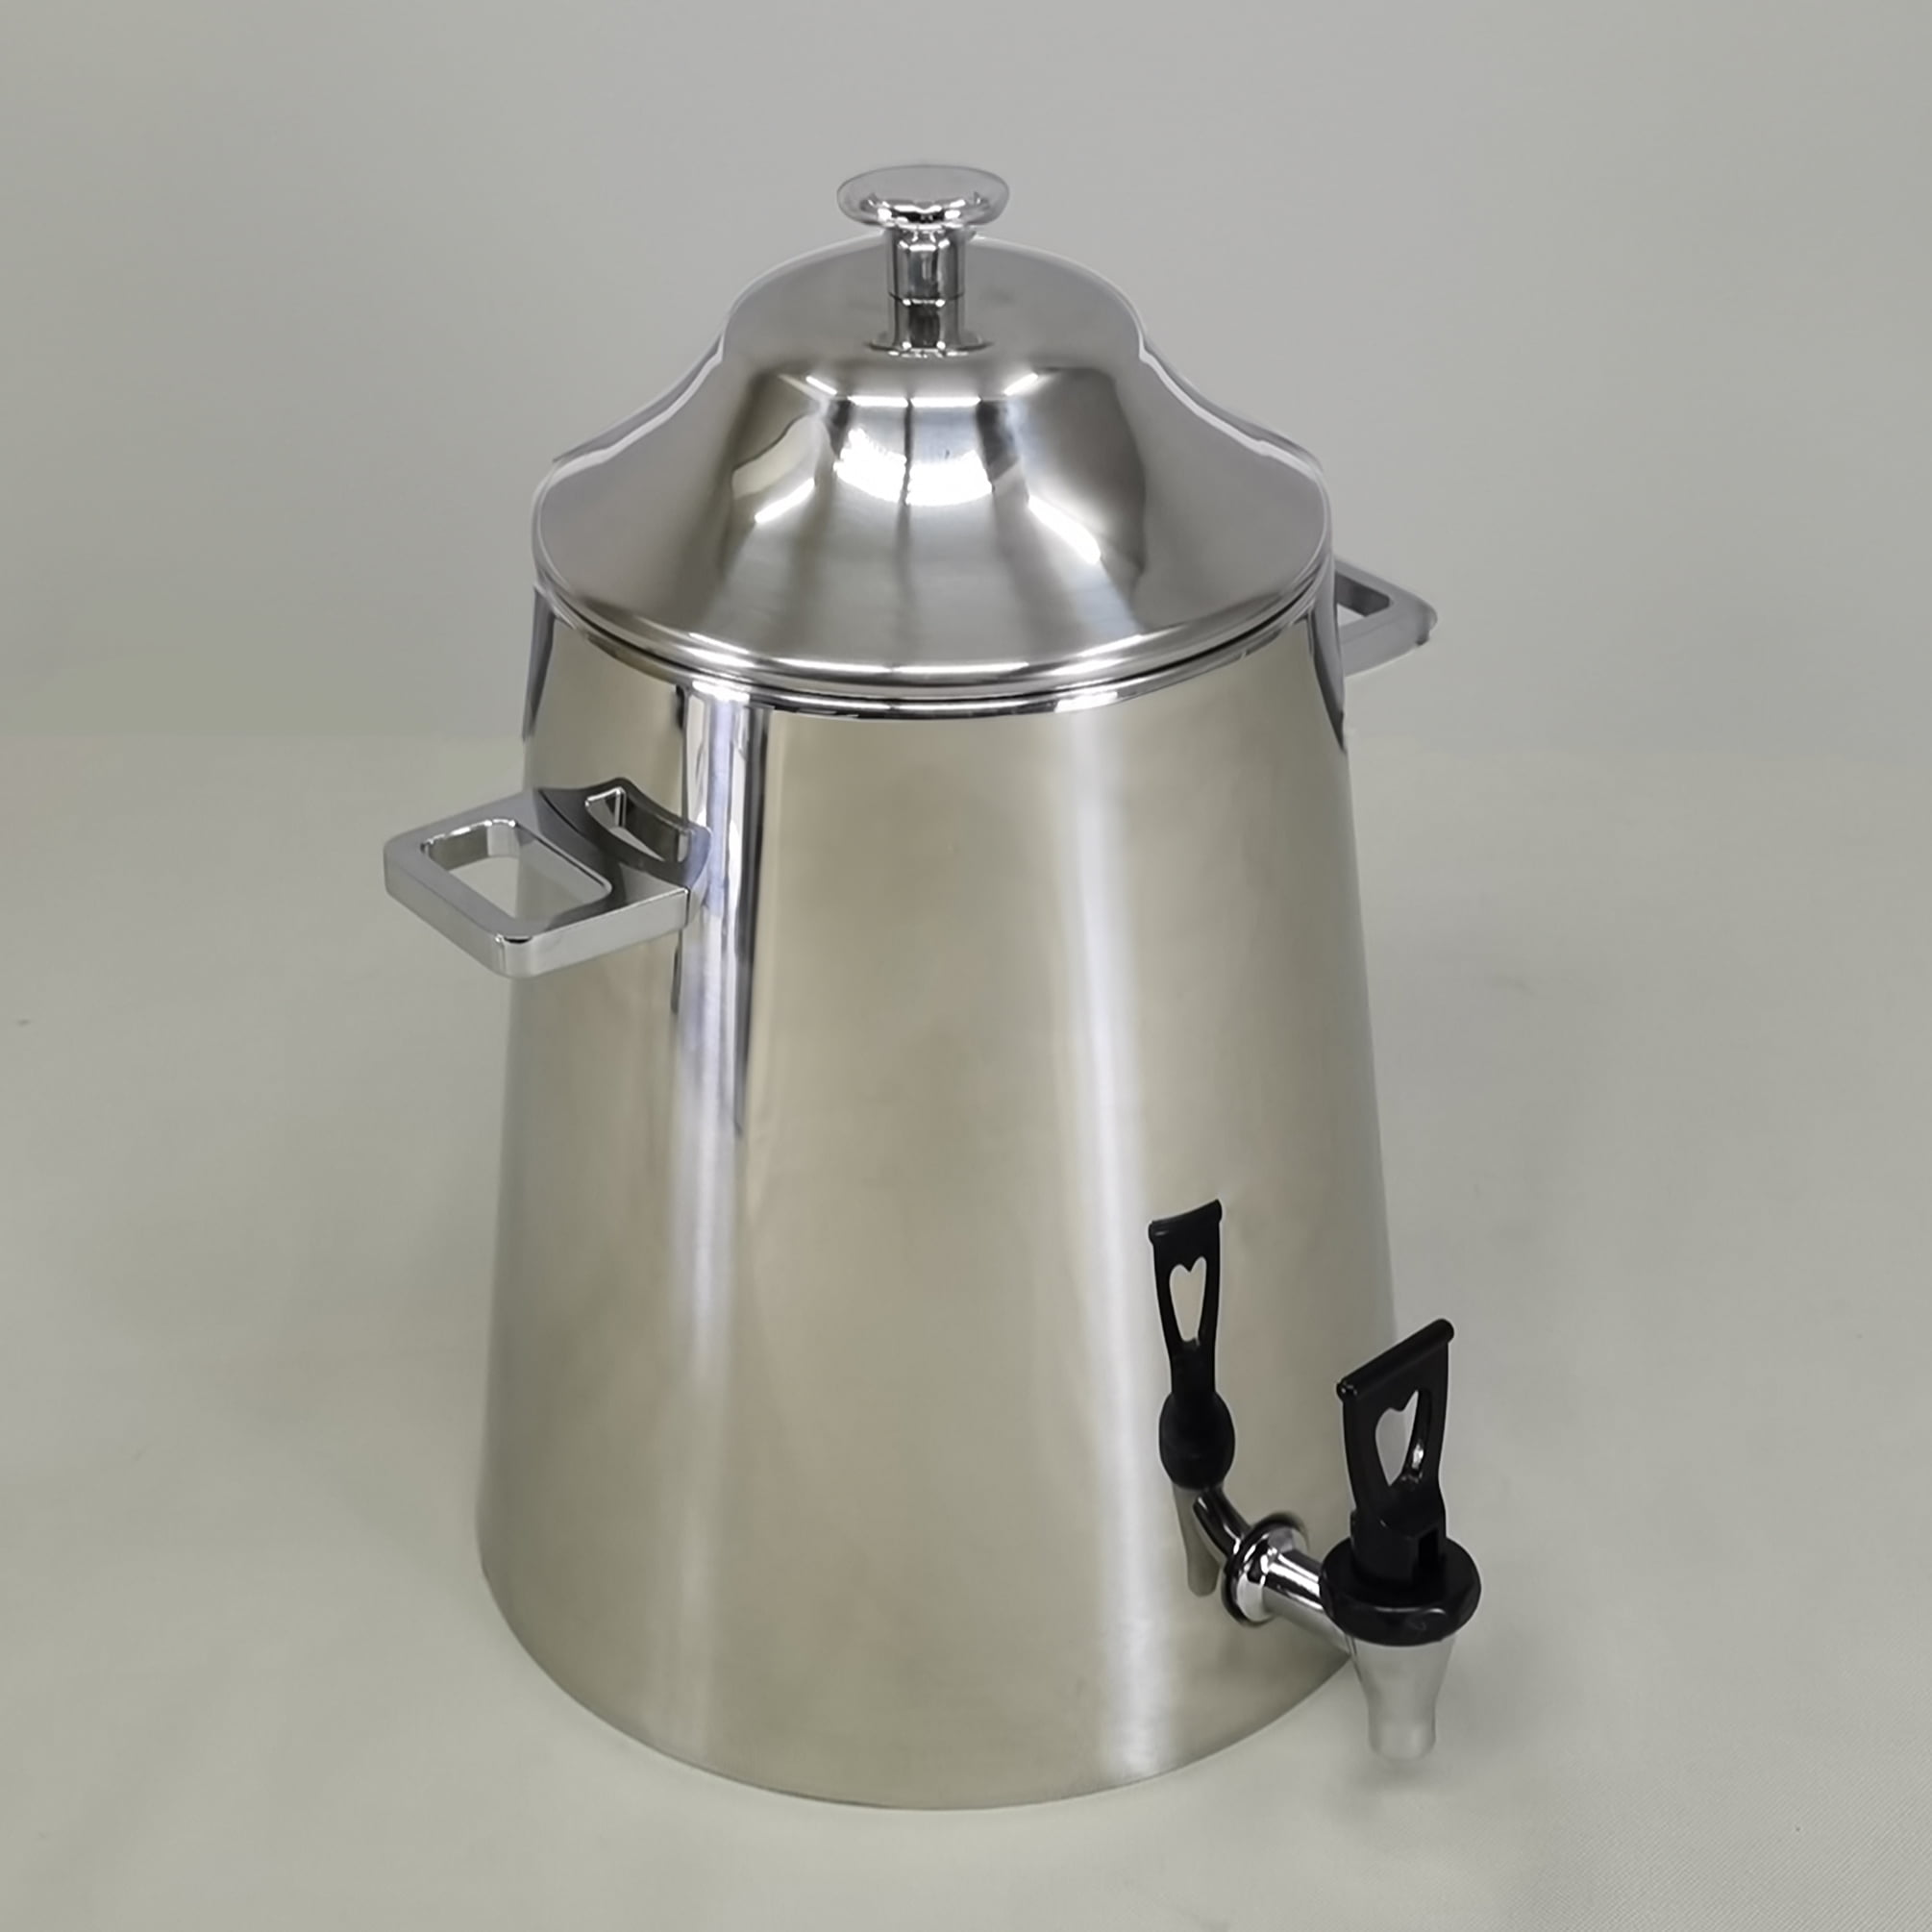 Central Exclusive 5 Gal Stainless Steel Coffee Urn - 13 3/4L x 12 1/5W x 24 2/5H